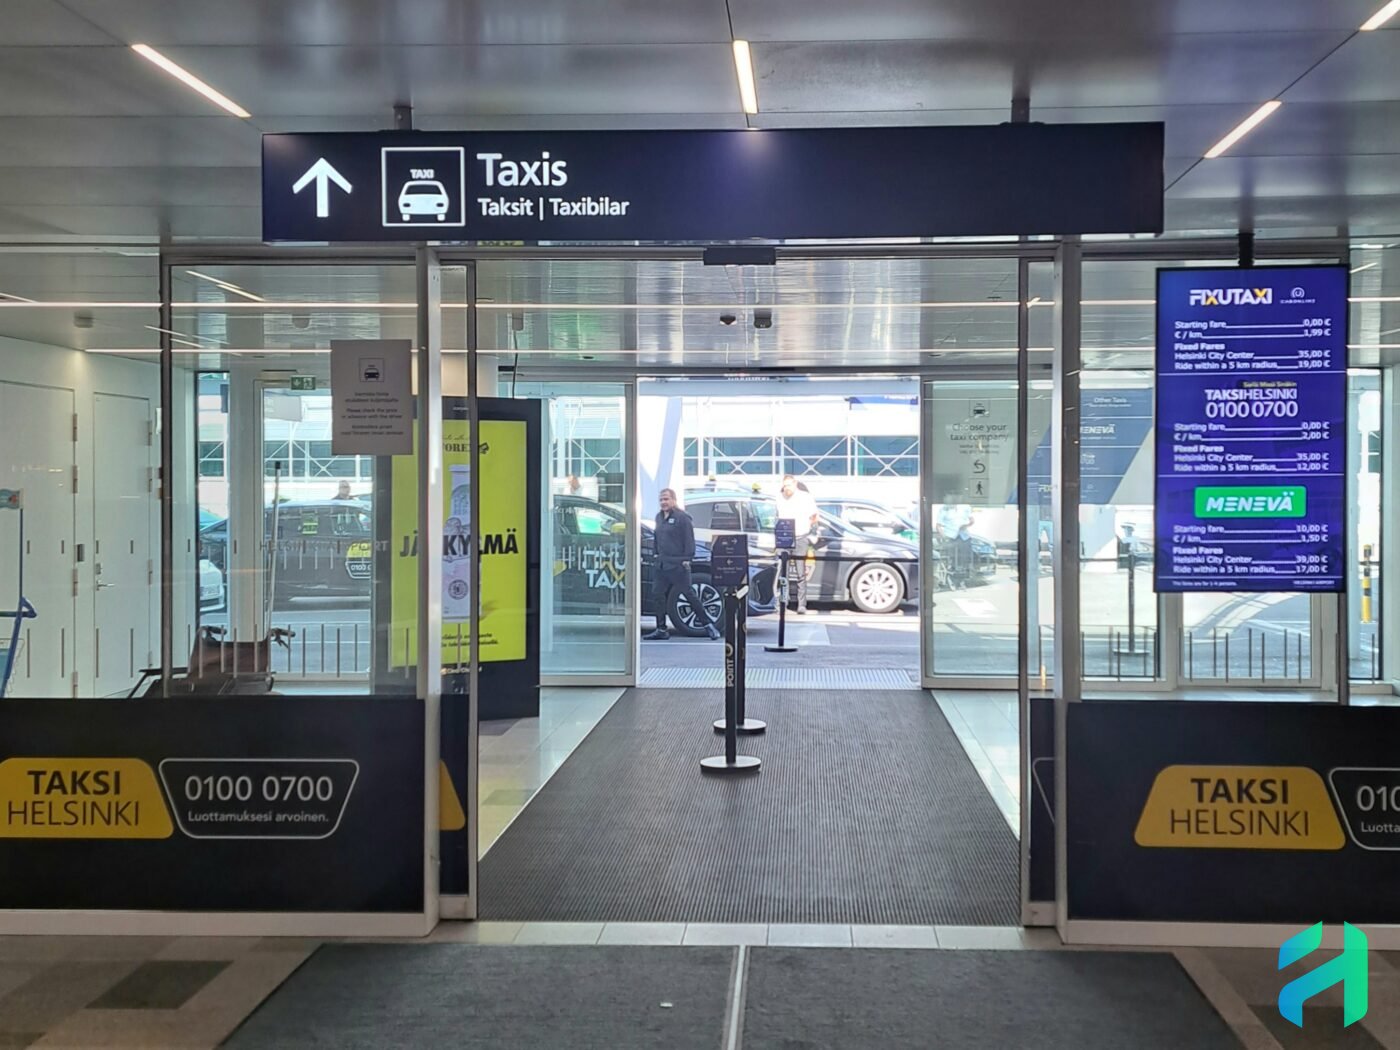 Entrance to the taxi station